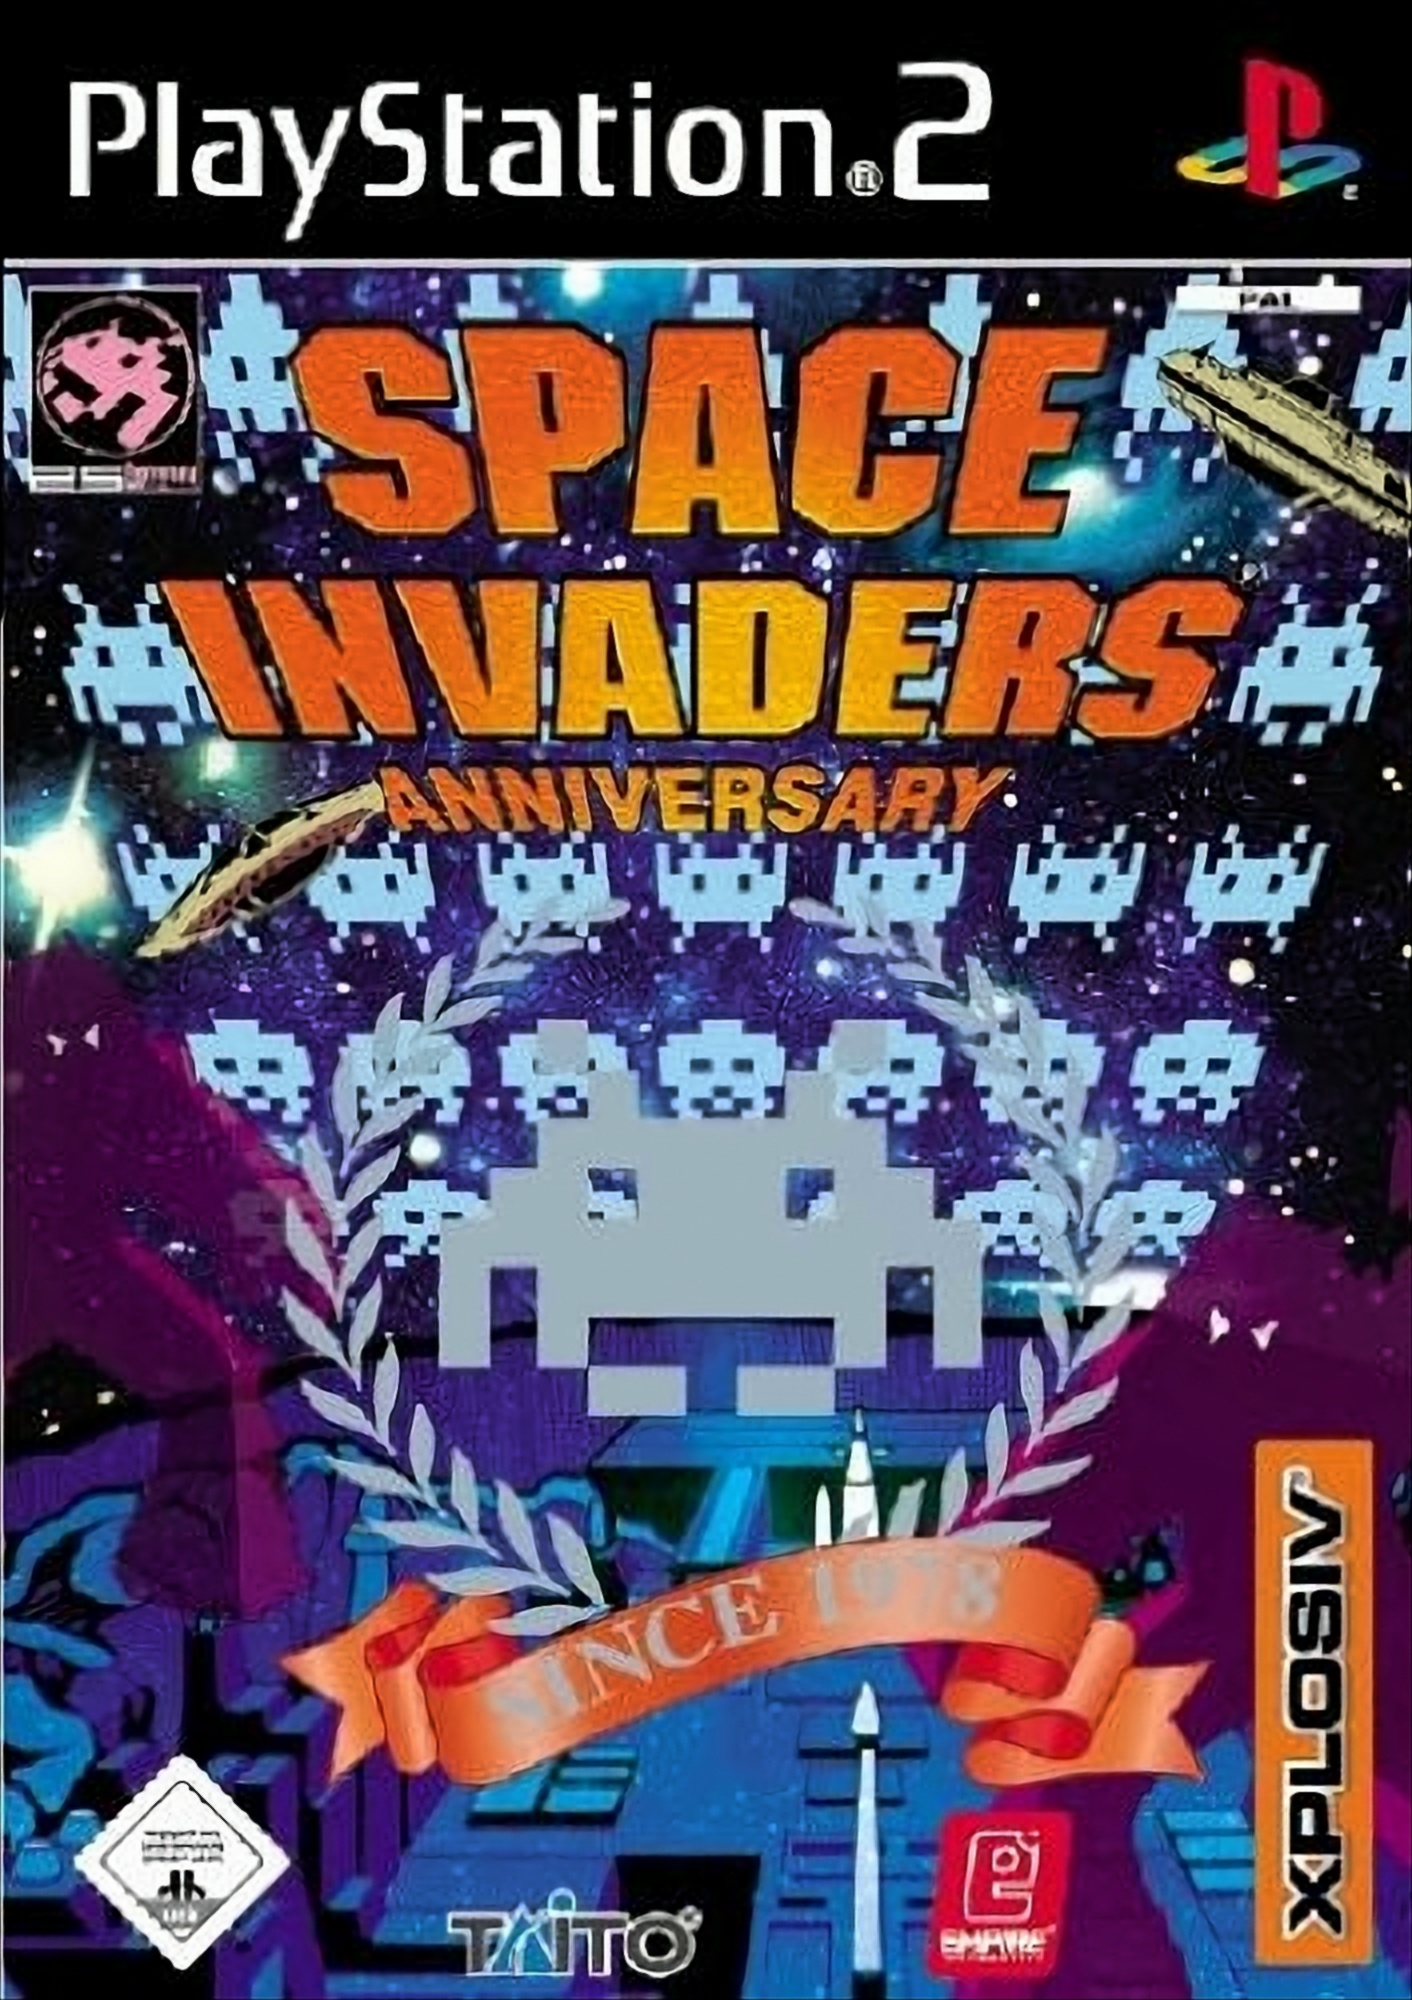 Anniversary - 2] Space [PlayStation Invaders